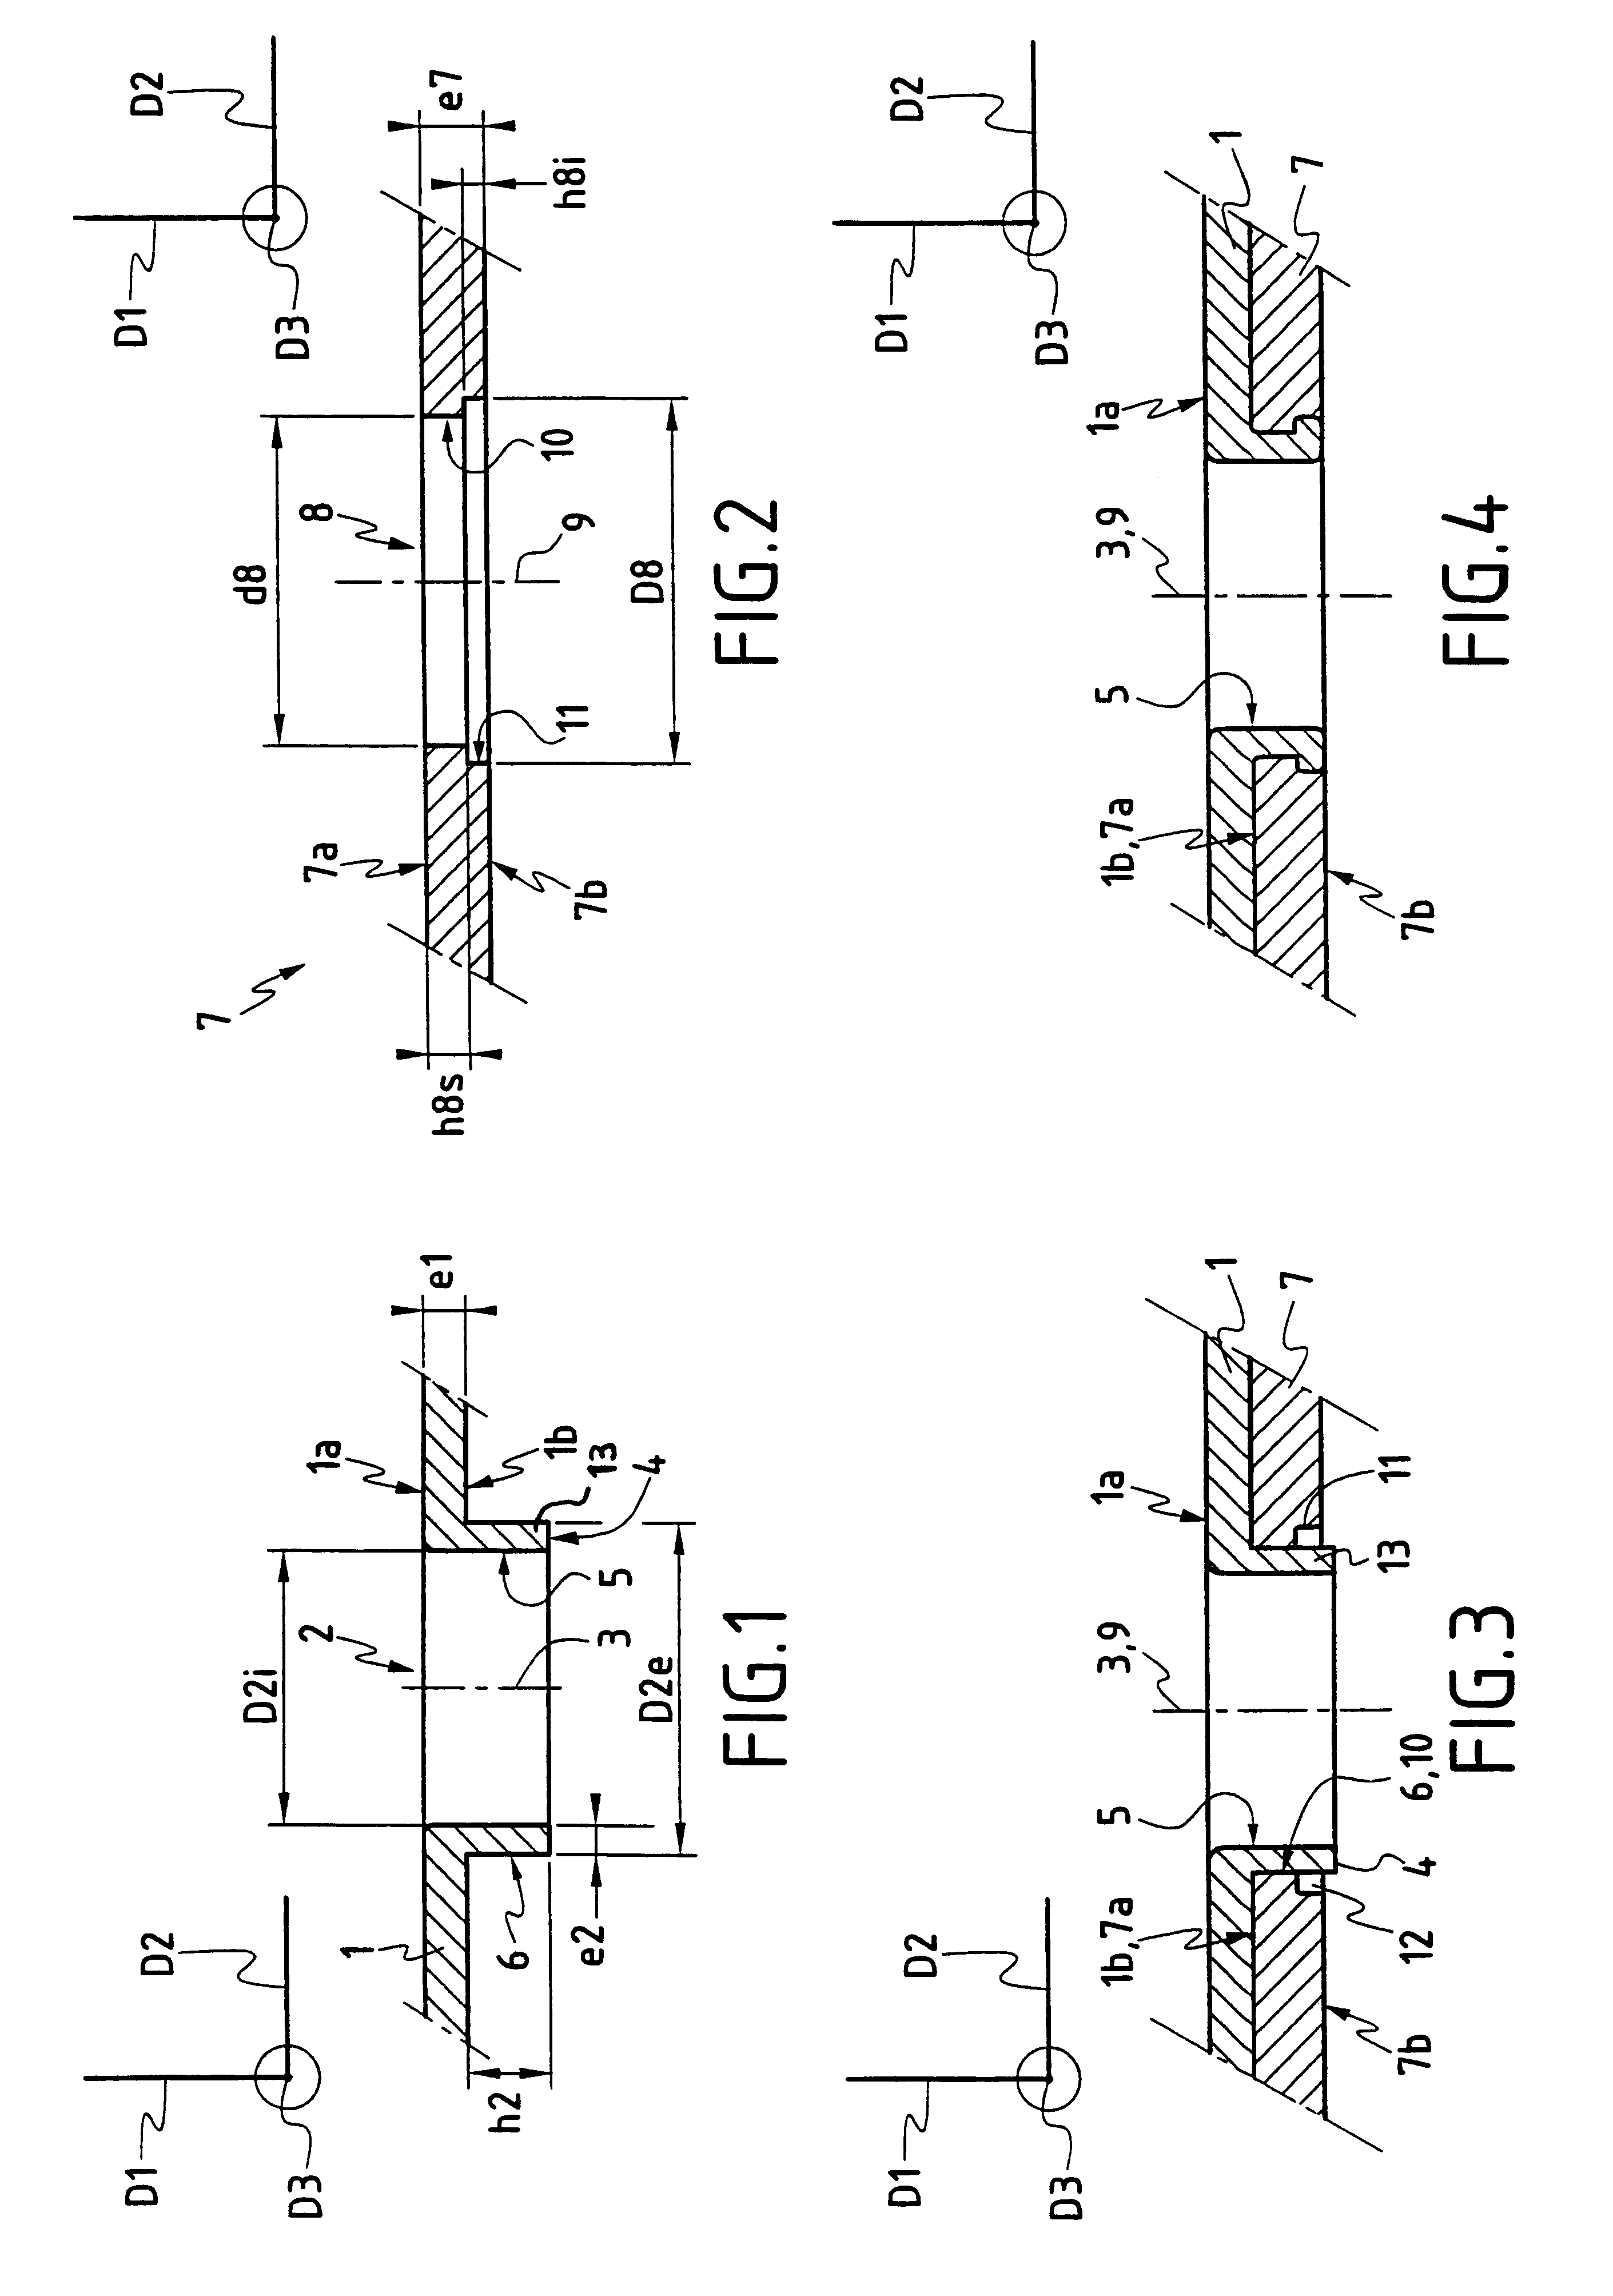 Method of the buttoning type for assembling sheets together without welding